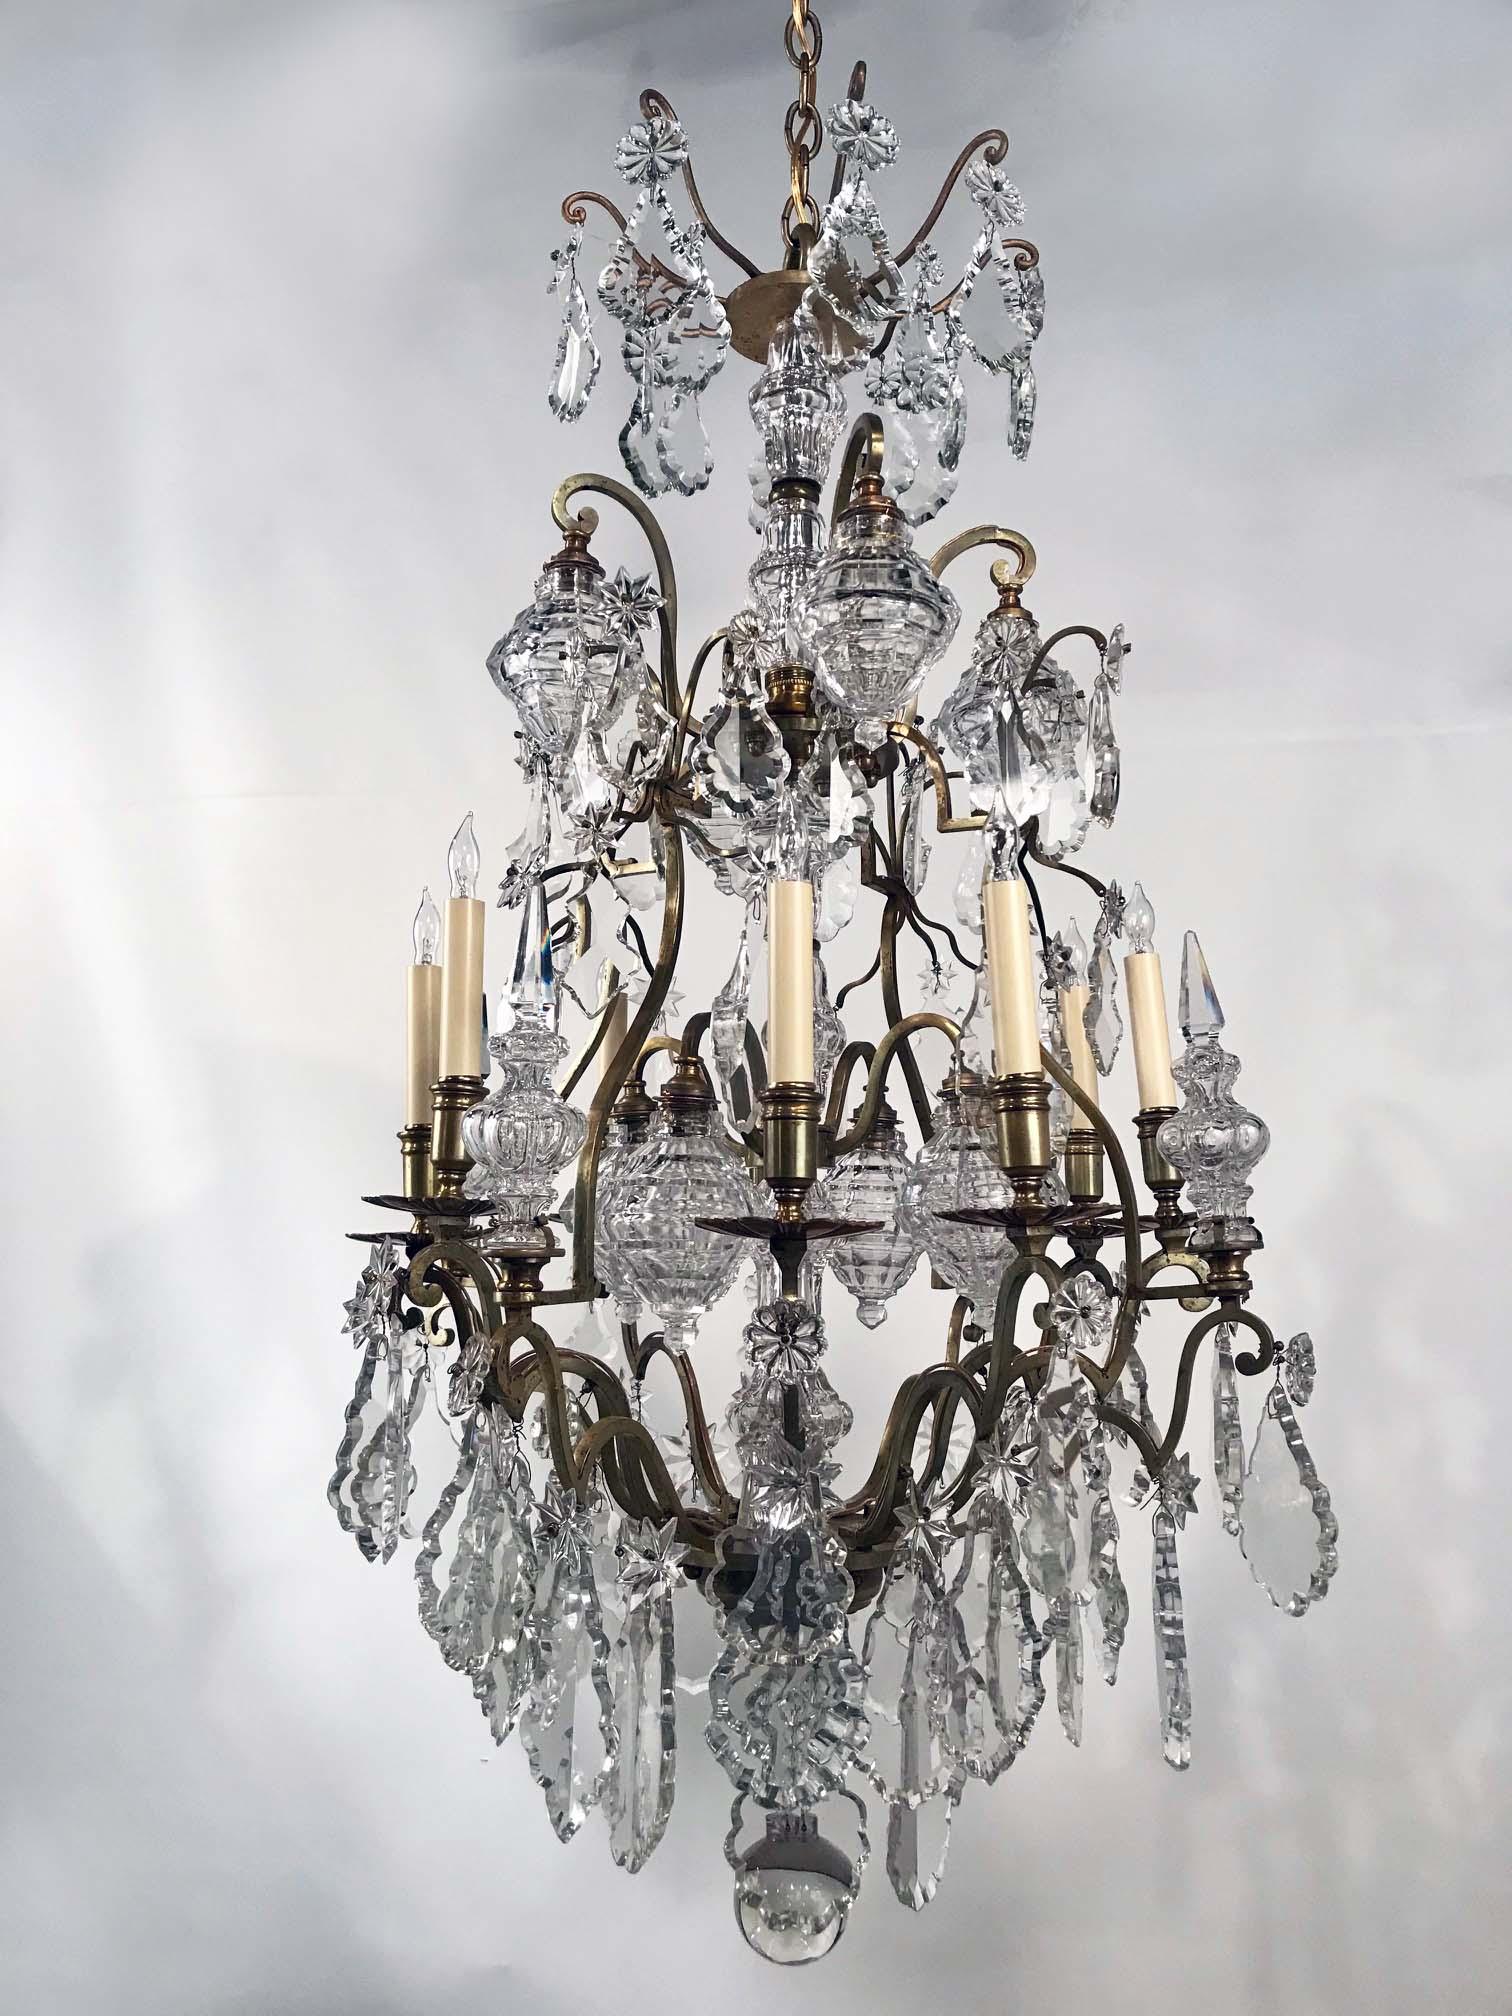 This chandelier has eight candle arms and most unusually eight further lights enclosed in faceted shades. This dates it to a time when electric lighting was less intense; we think the Belle Époque. It is boldly hung with large violin pendents, star